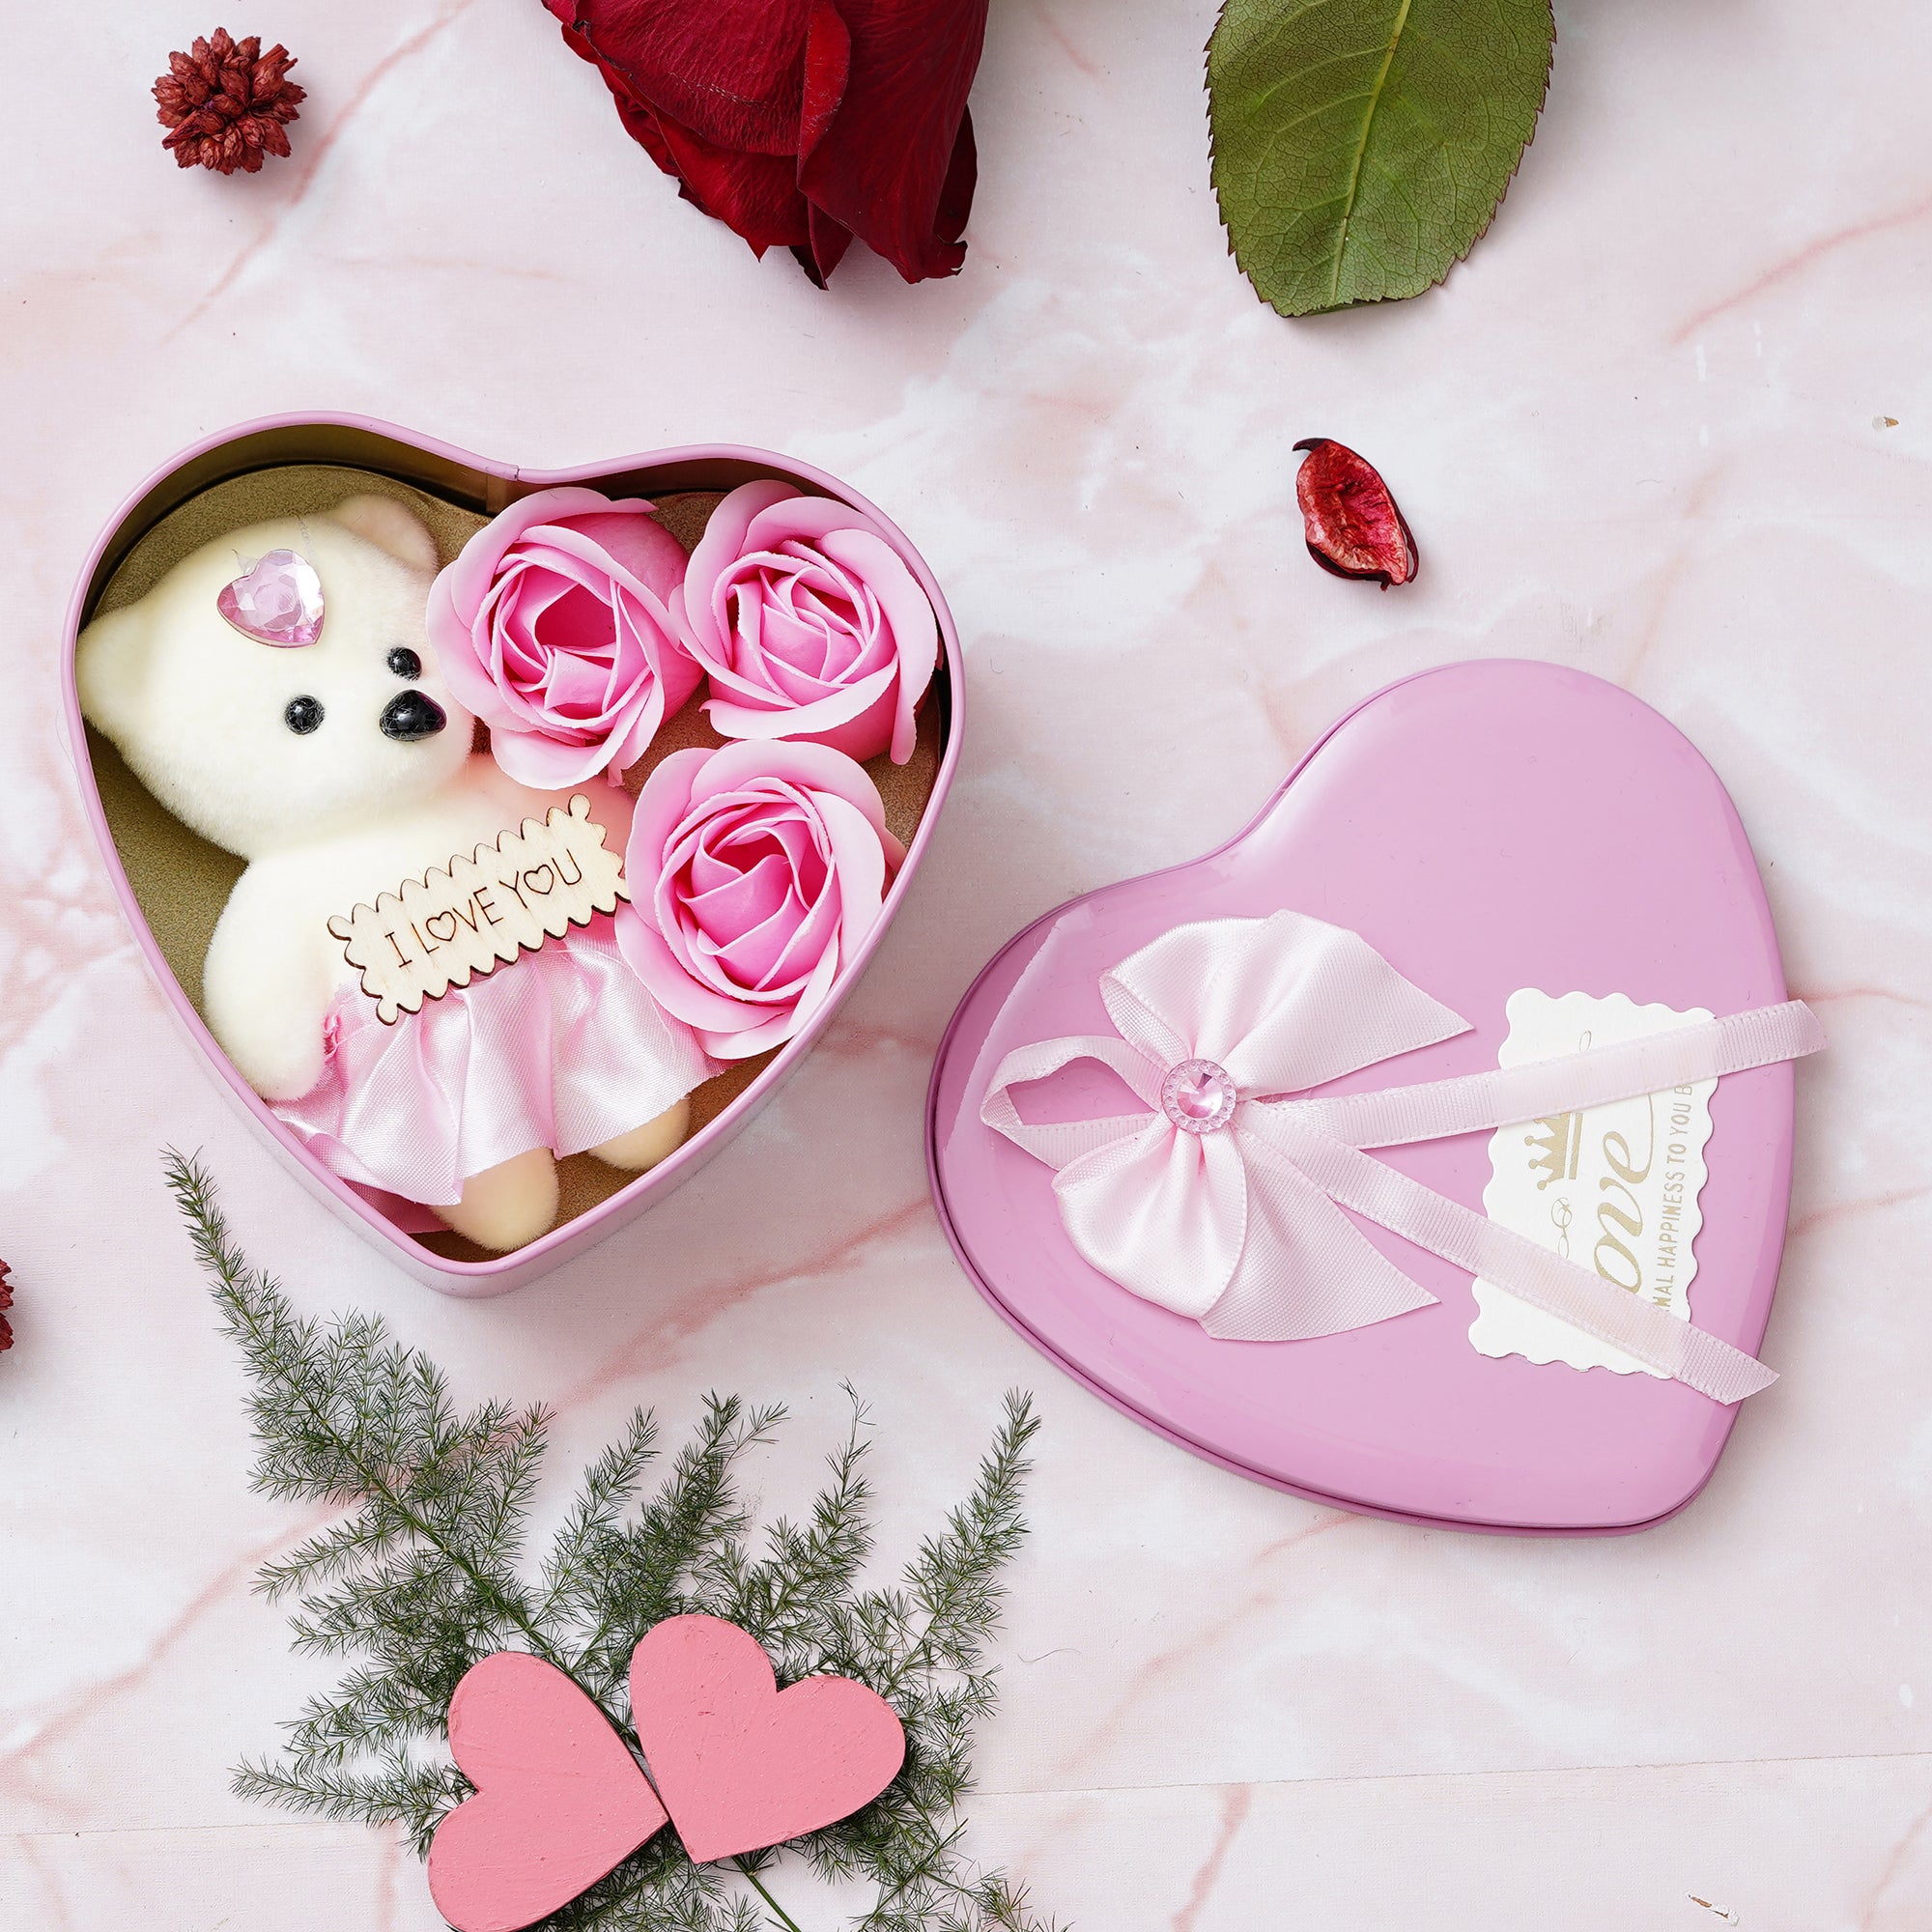 Valentine Combo of Set of 8 Love Post Cards Gift Cards Set, "Love You" Wooden Showpiece With Stand, Pink Heart Shaped Gift Box with Teddy and Roses 5